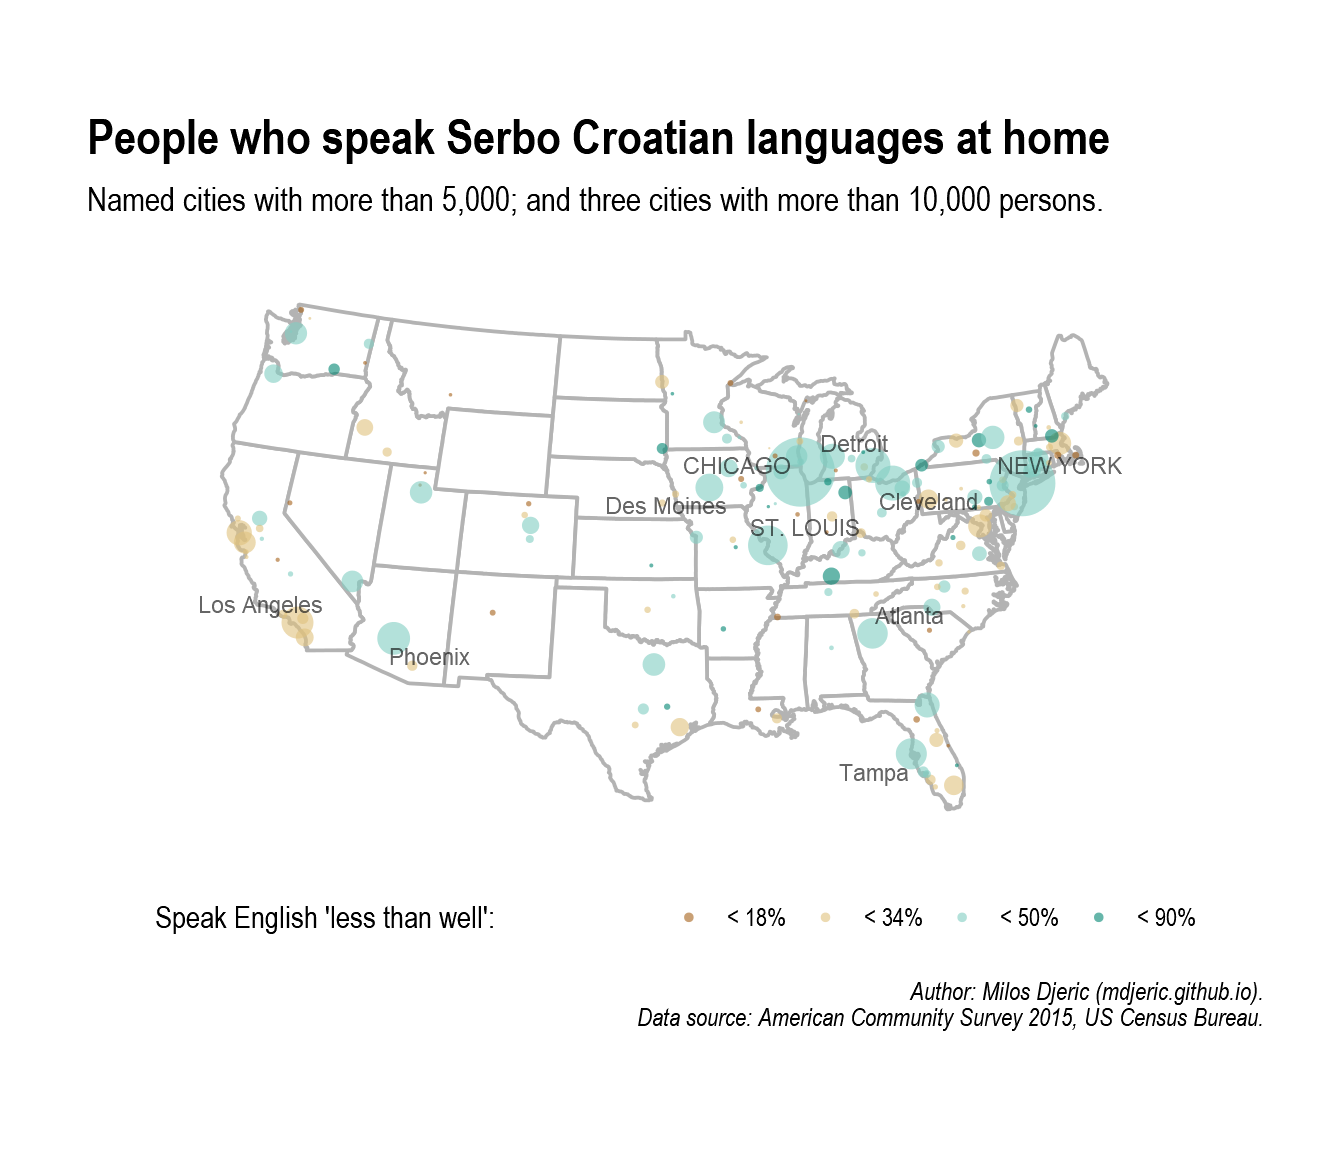 Map of US counties: Largest number of people speak Serbo-Croatian langauges in Chicago, New York, and St Louis.